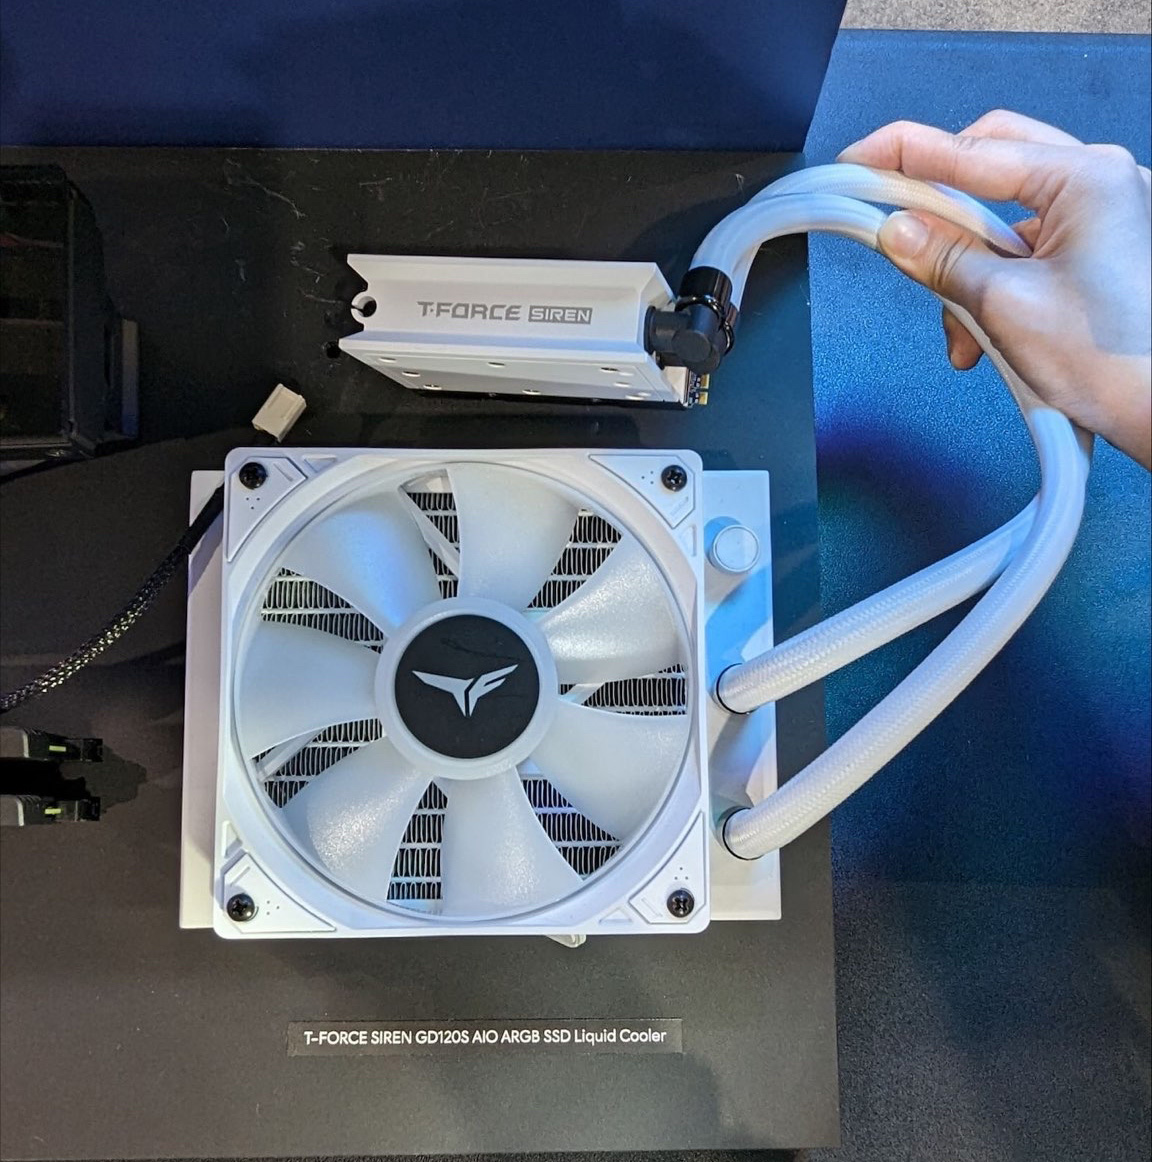 TeamGroup's radical new AIO cooler chills your SSD too